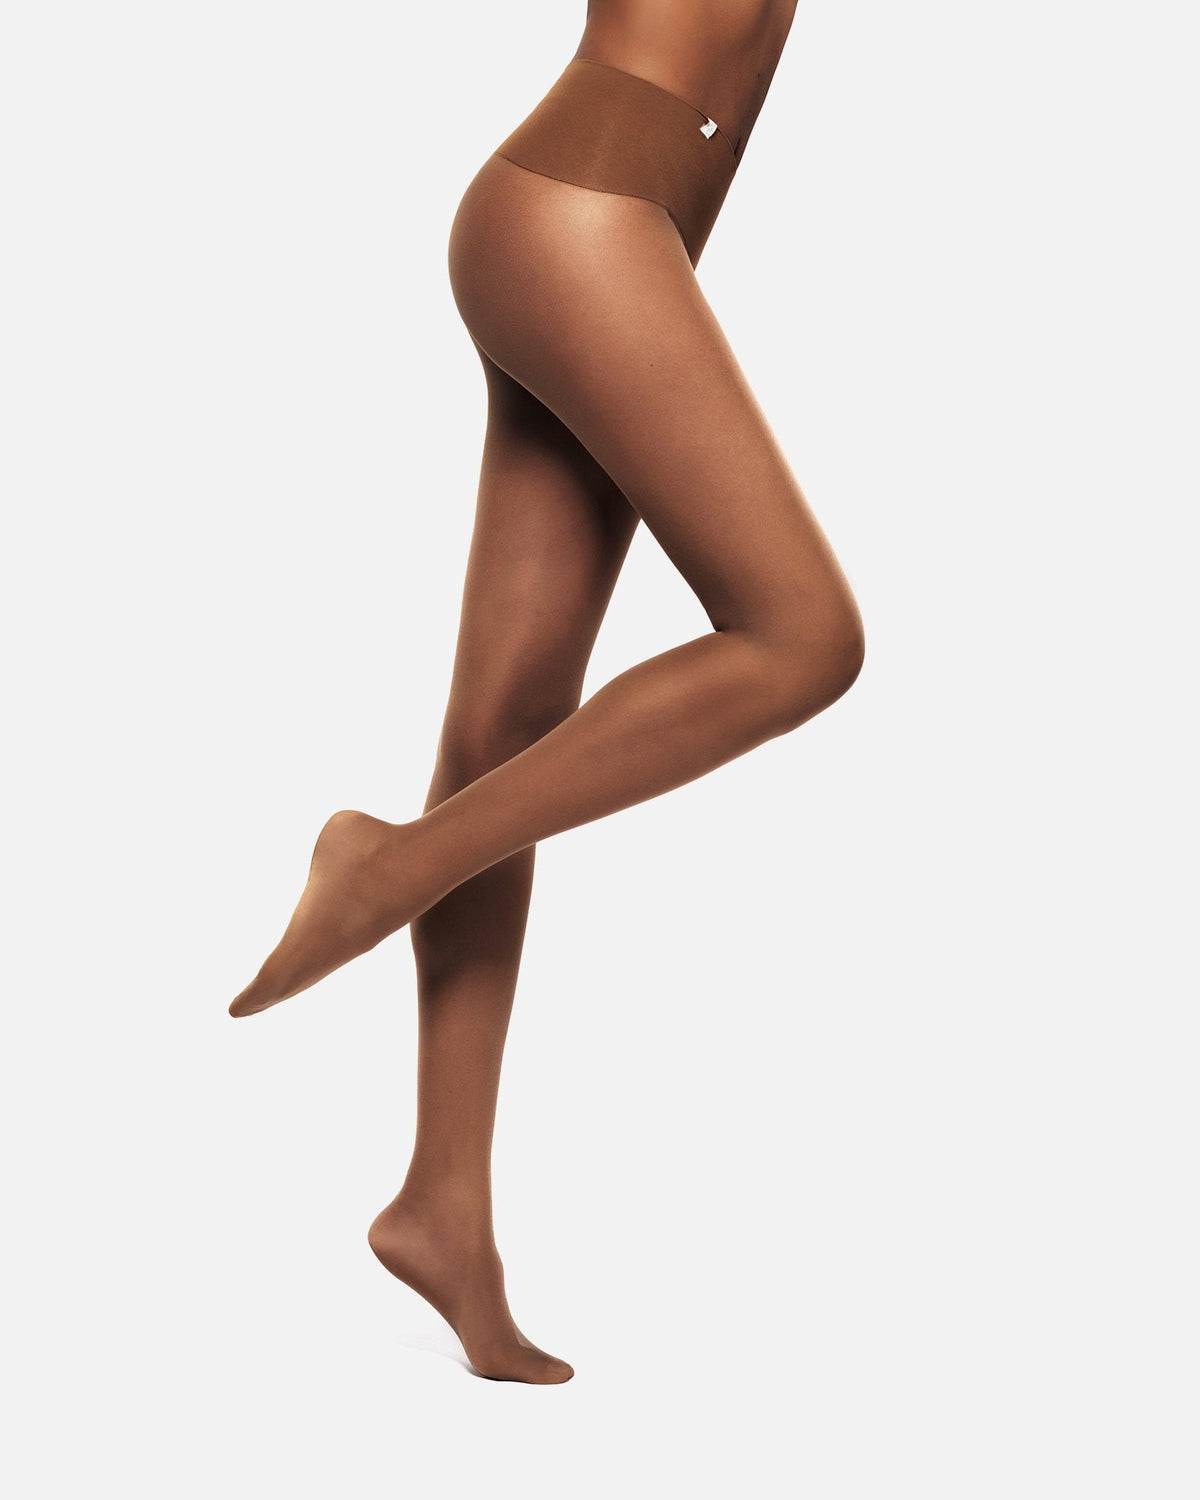 Hedoine ladder-resist seamless opaque nude Tights for women M&S Woolford ladies tights 